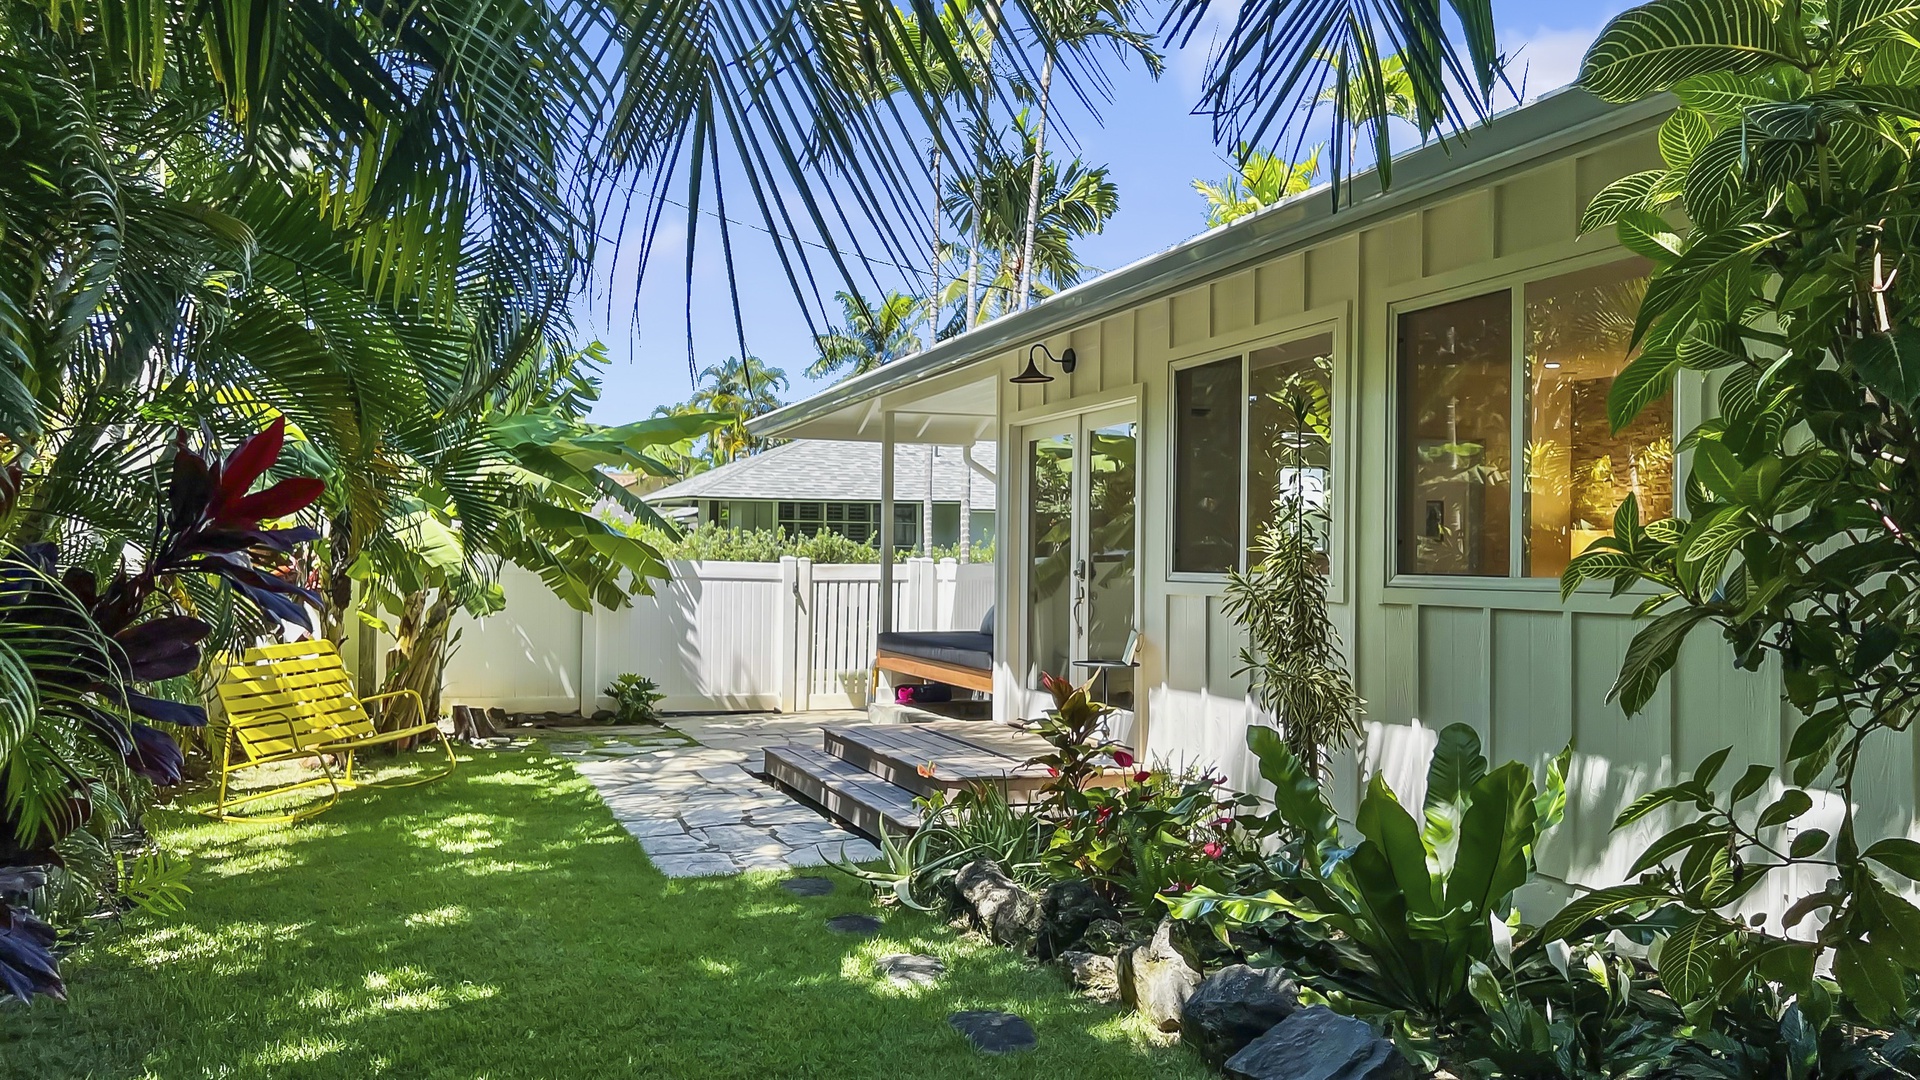 Kailua Vacation Rentals, Lanikai Ola Nani - Back into a tranquil and relaxed staycation you definitely deserve.